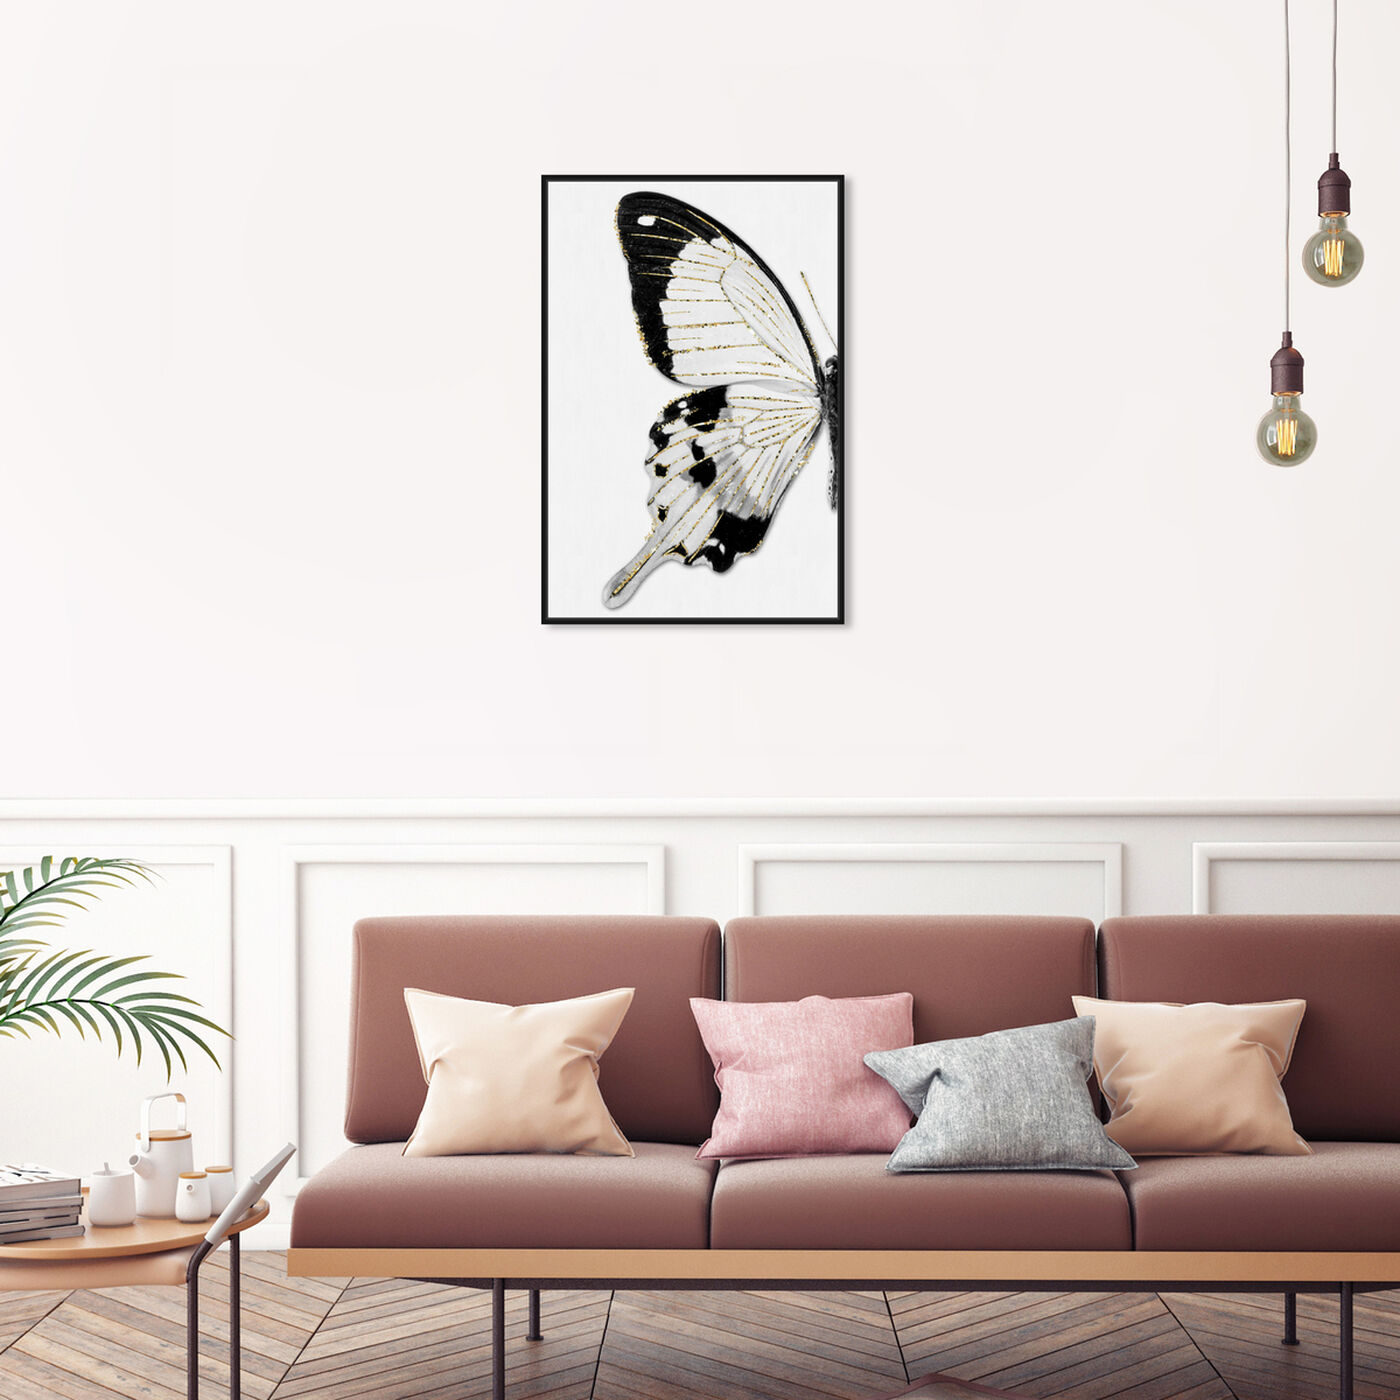 Hanging view of Monochrome Butterfly II featuring animals and insects art.